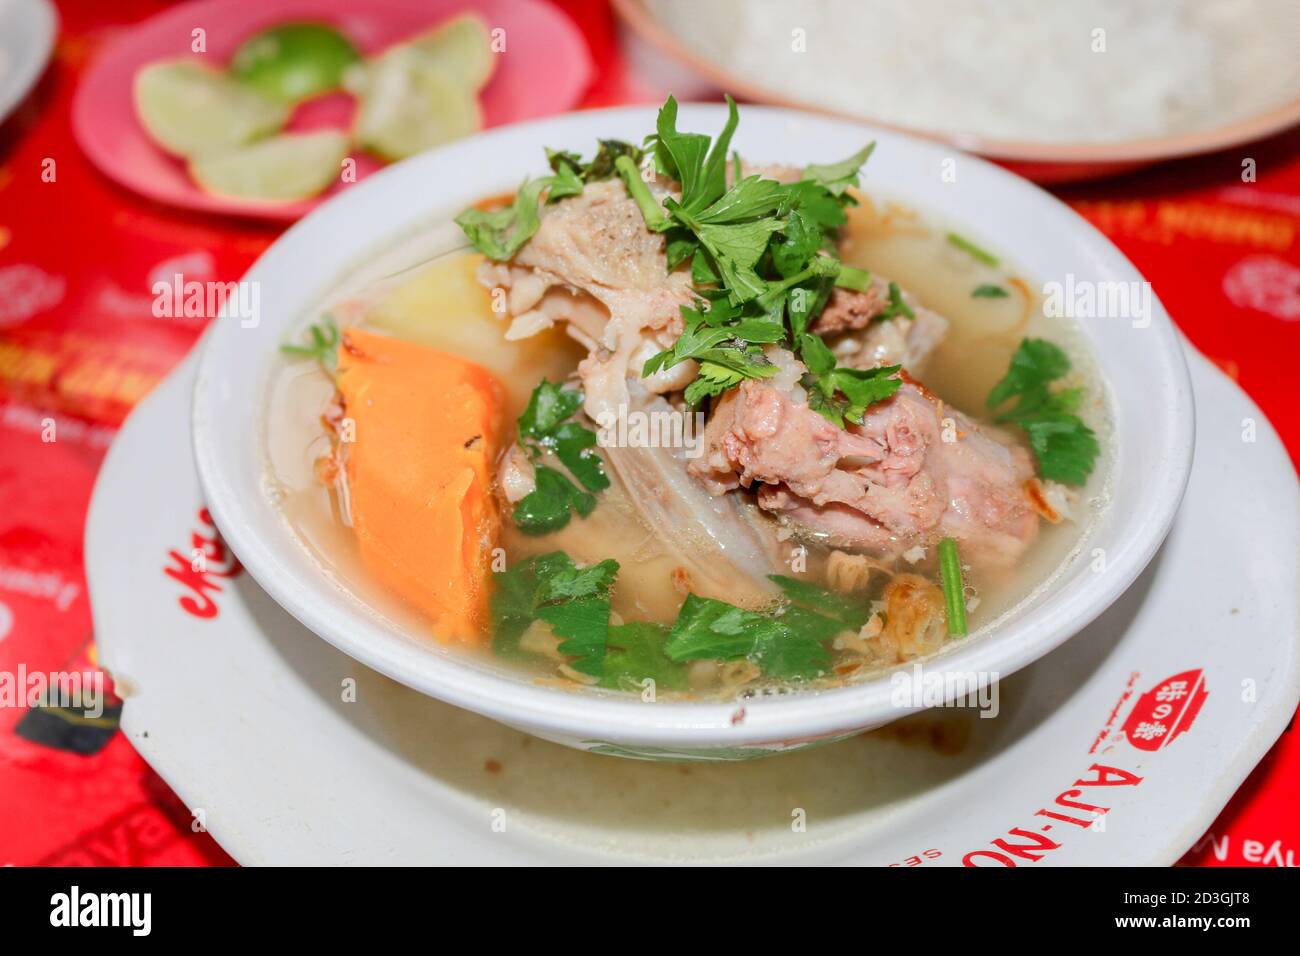 Sop buntut or oxtail soup. Indonesian traditional culinary. Stock Photo